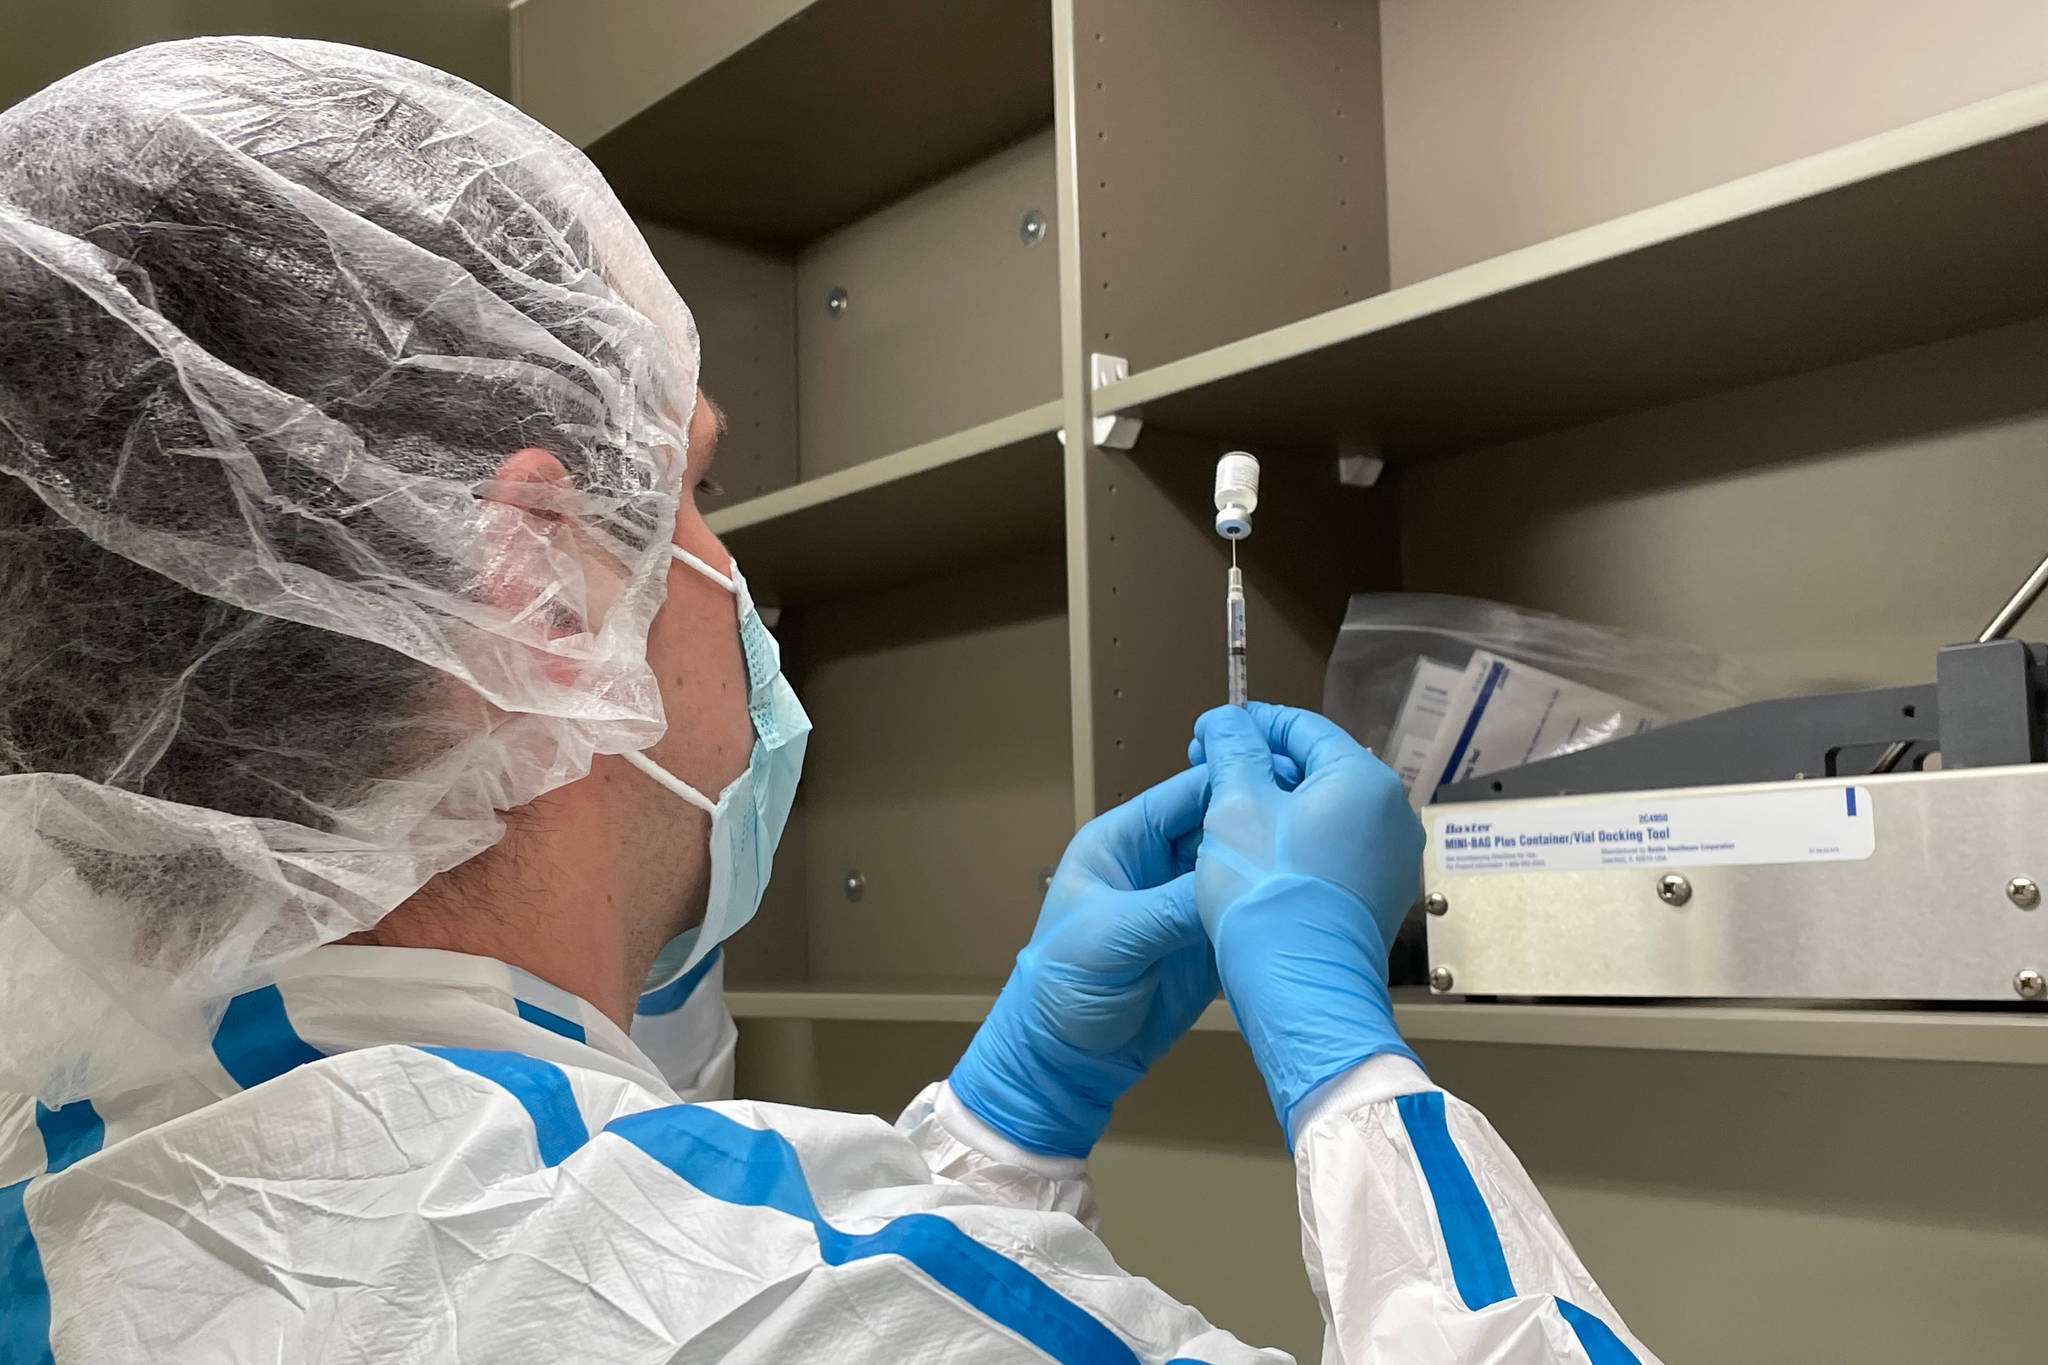 Justin Richardson, a pharmacy technician with Bartlett Regional Hospital, prepares the first dose of the Pfizer/BioNTech coronavirus vaccine on Dec. 15, 2020. (Courtesy photo / Katie Bausler)